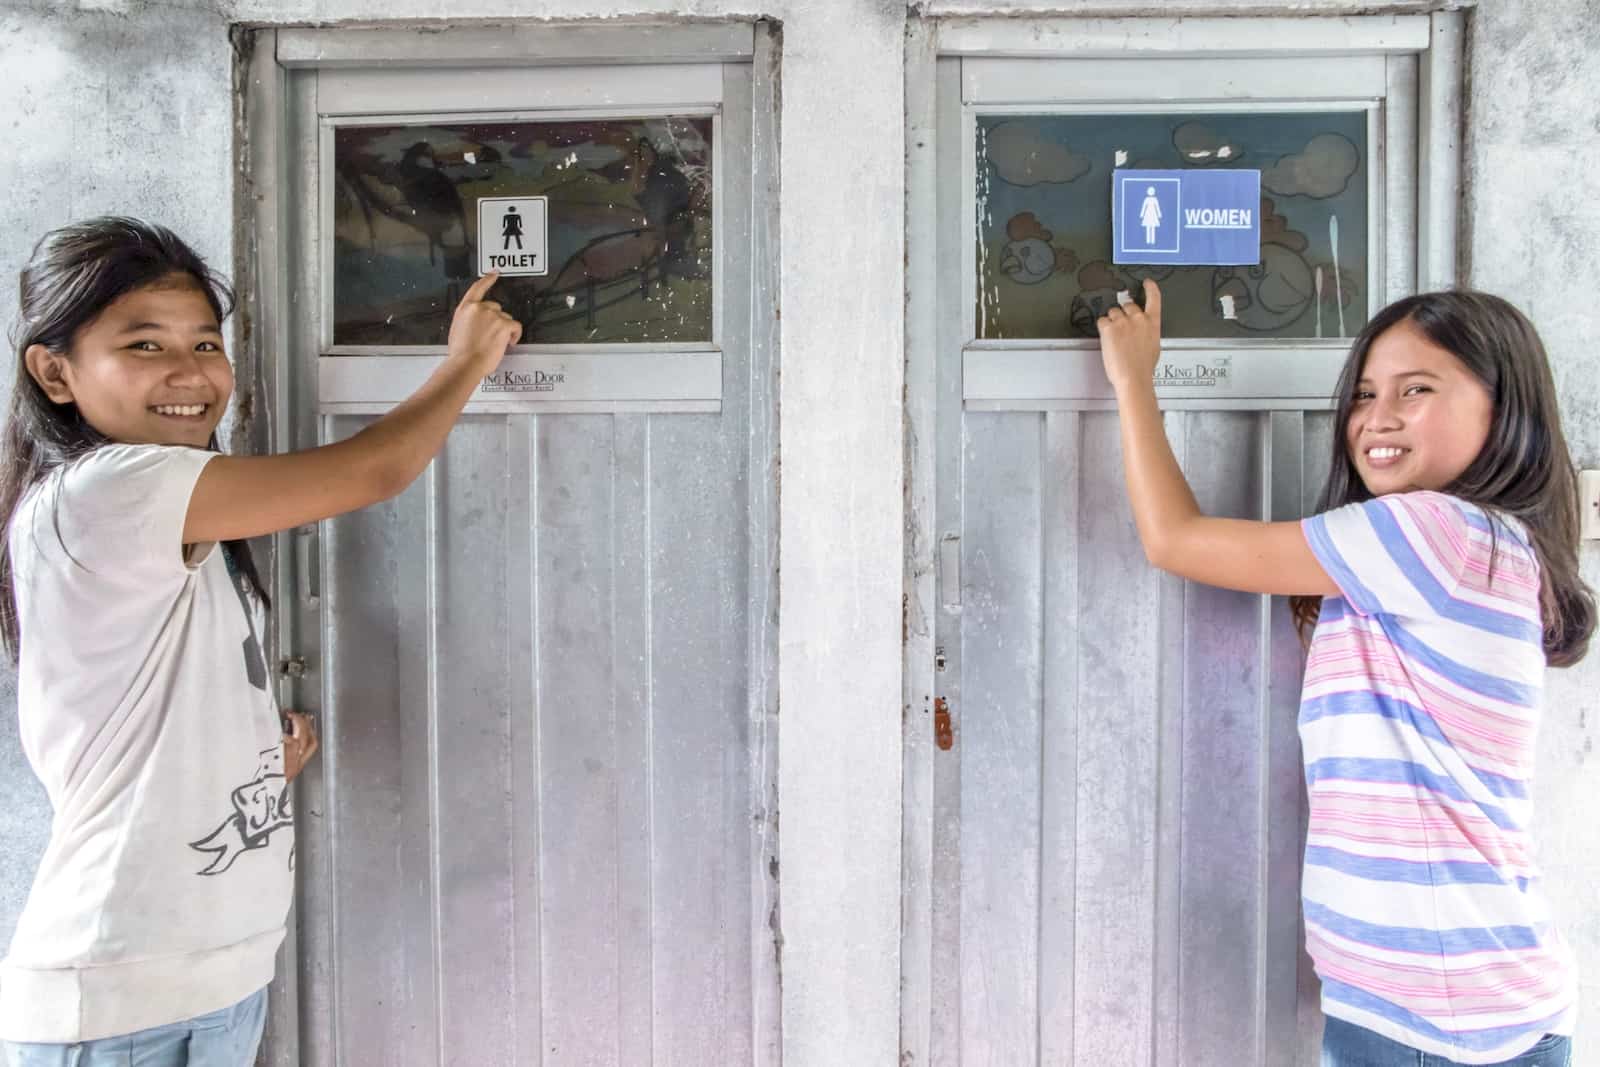 Two girls stand outside bathrooms, pointing at the "women's" signs.